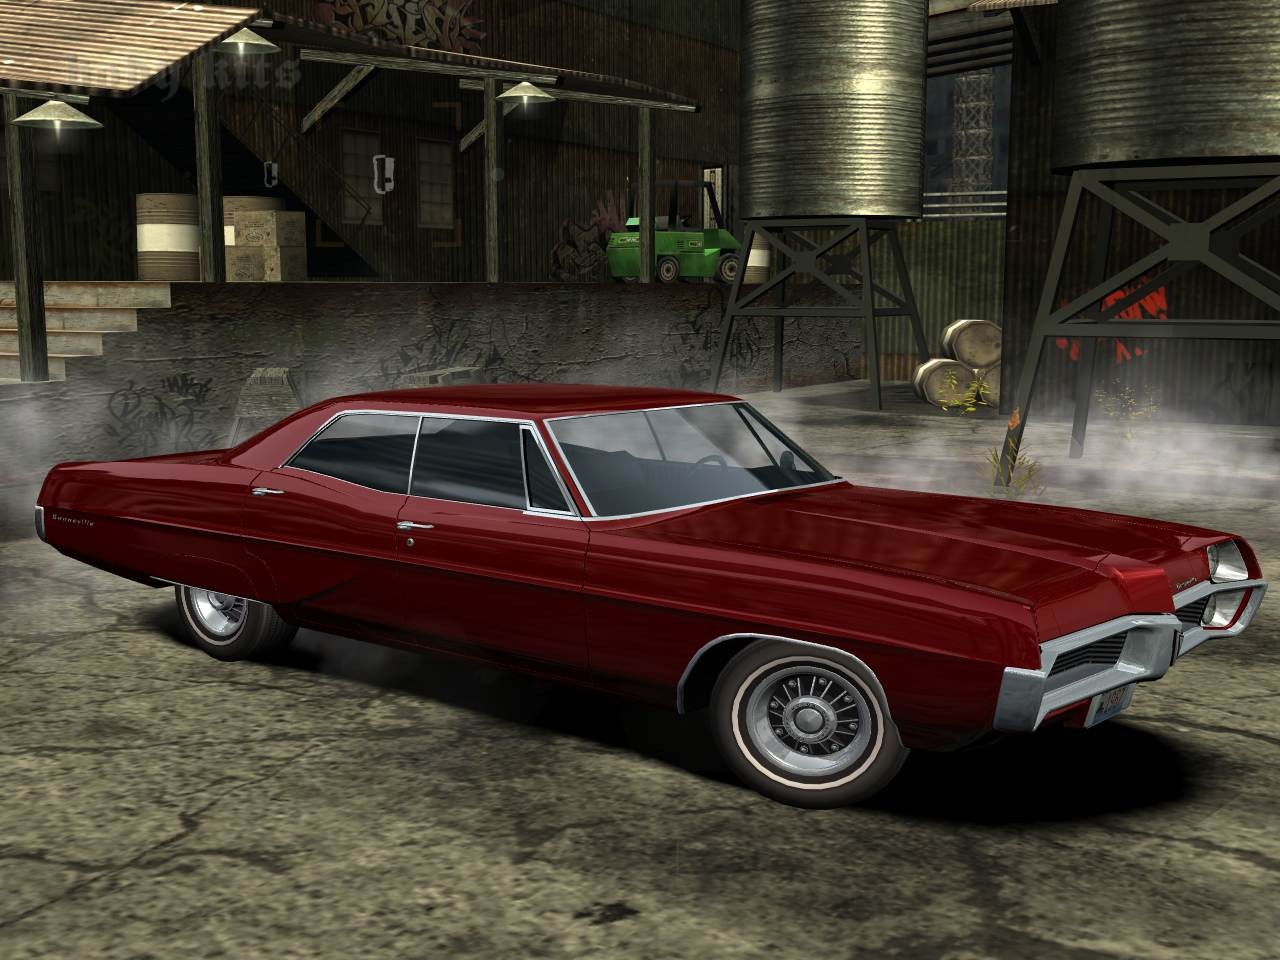 Pontiac Bonneville (1967) v.2 for Need For Speed Most Wanted